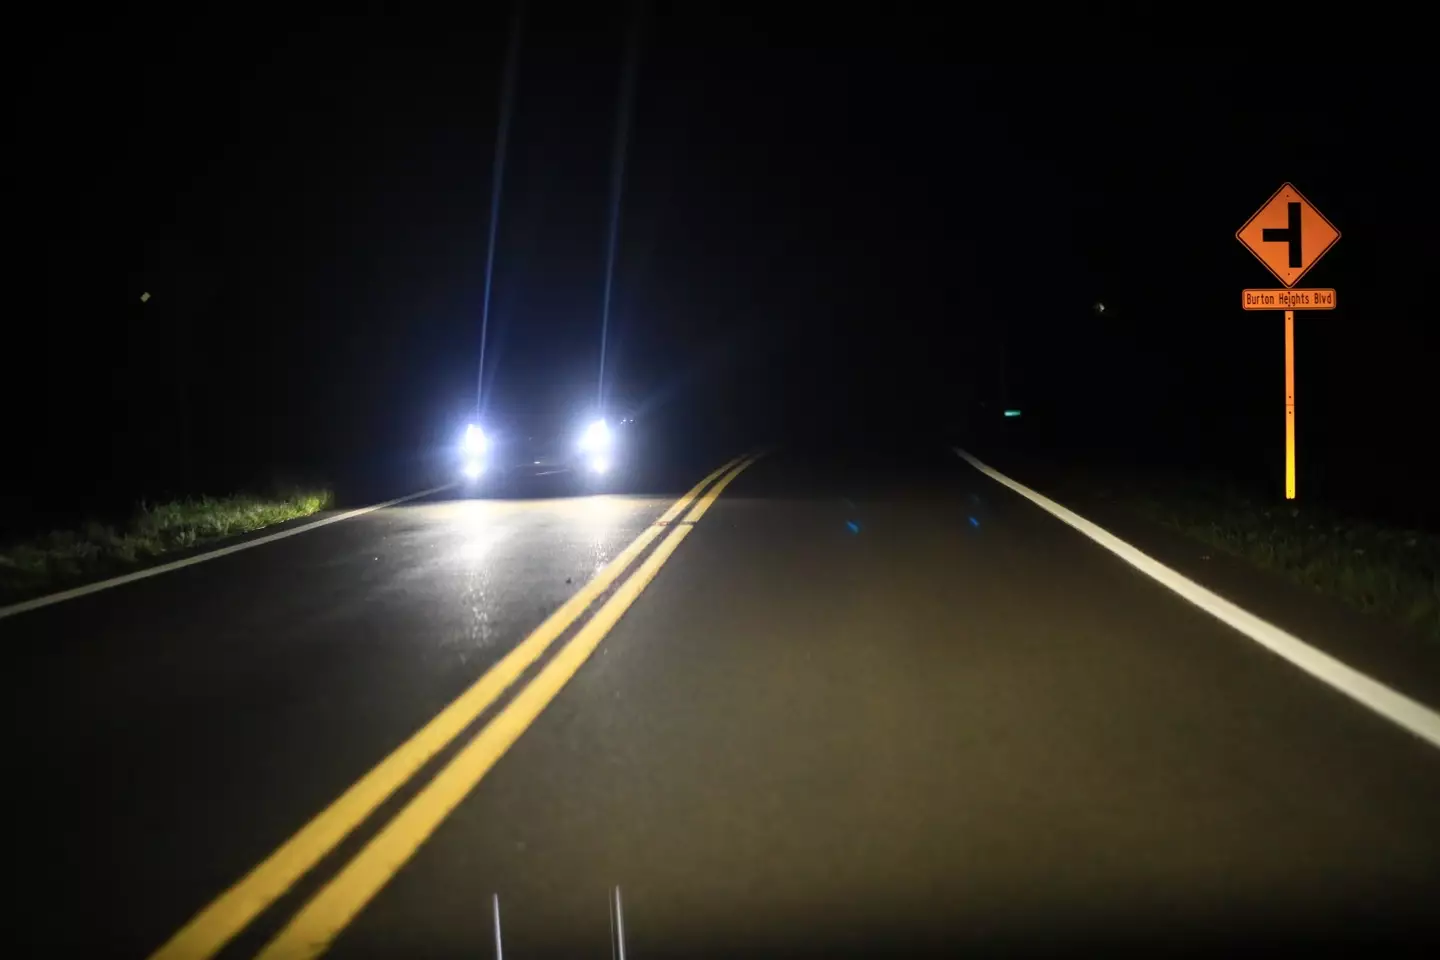 Bright headlights can be a danger to other road users.